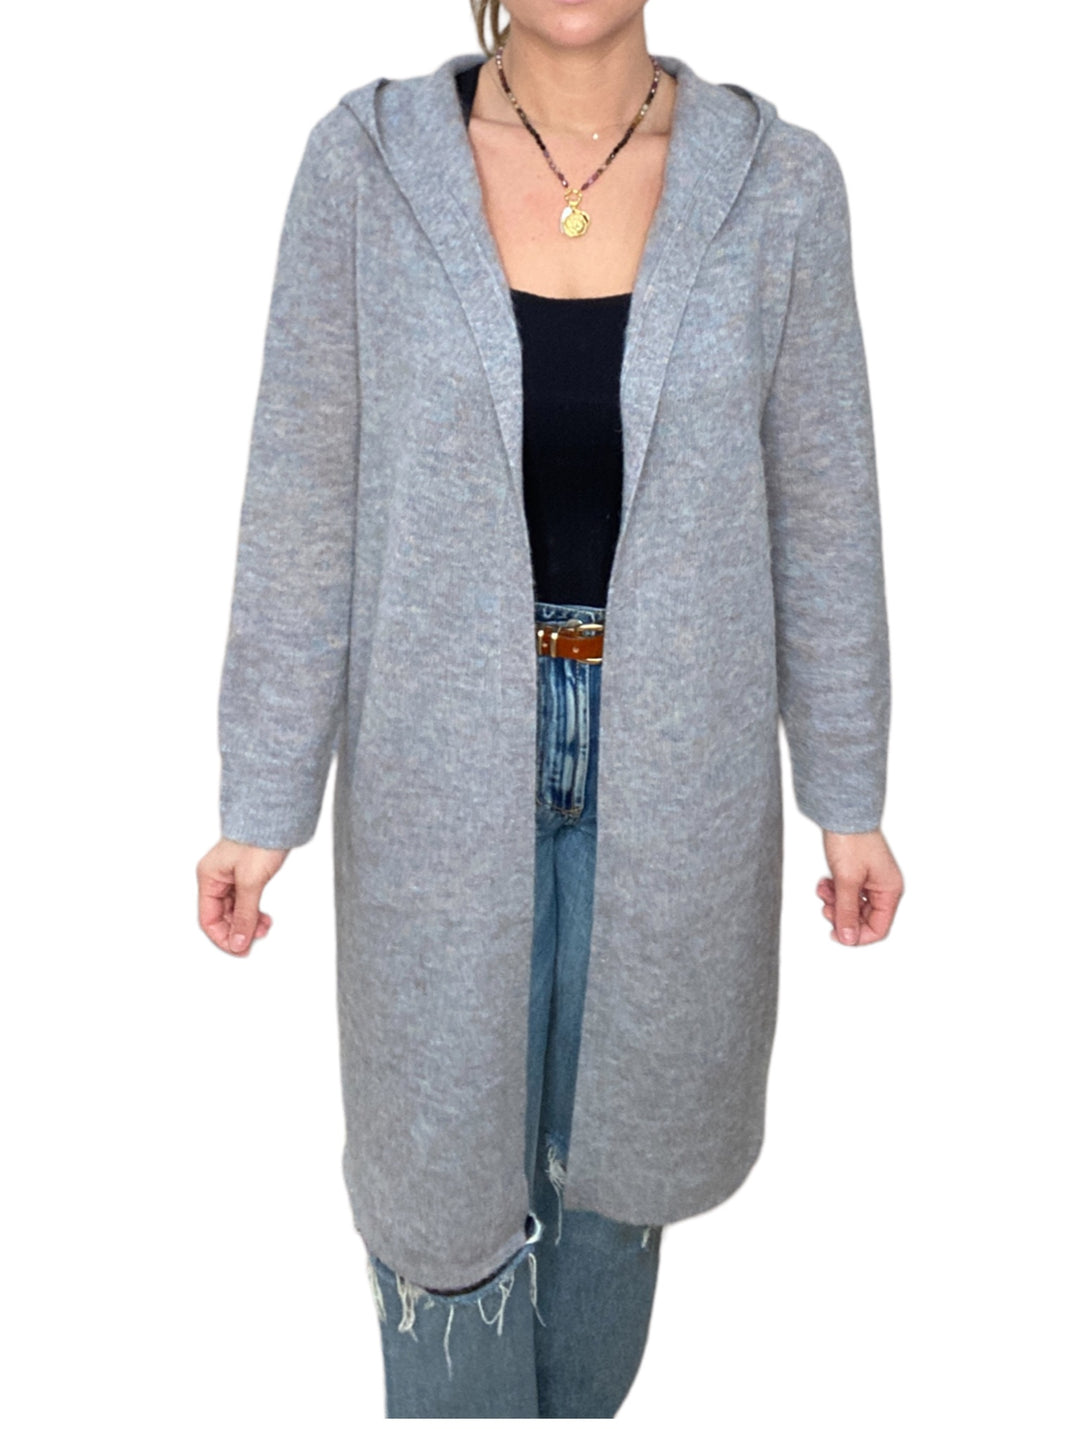 APLACA/WOOL EAGLE WING HOODED CARDI-SPRITE - Kingfisher Road - Online Boutique